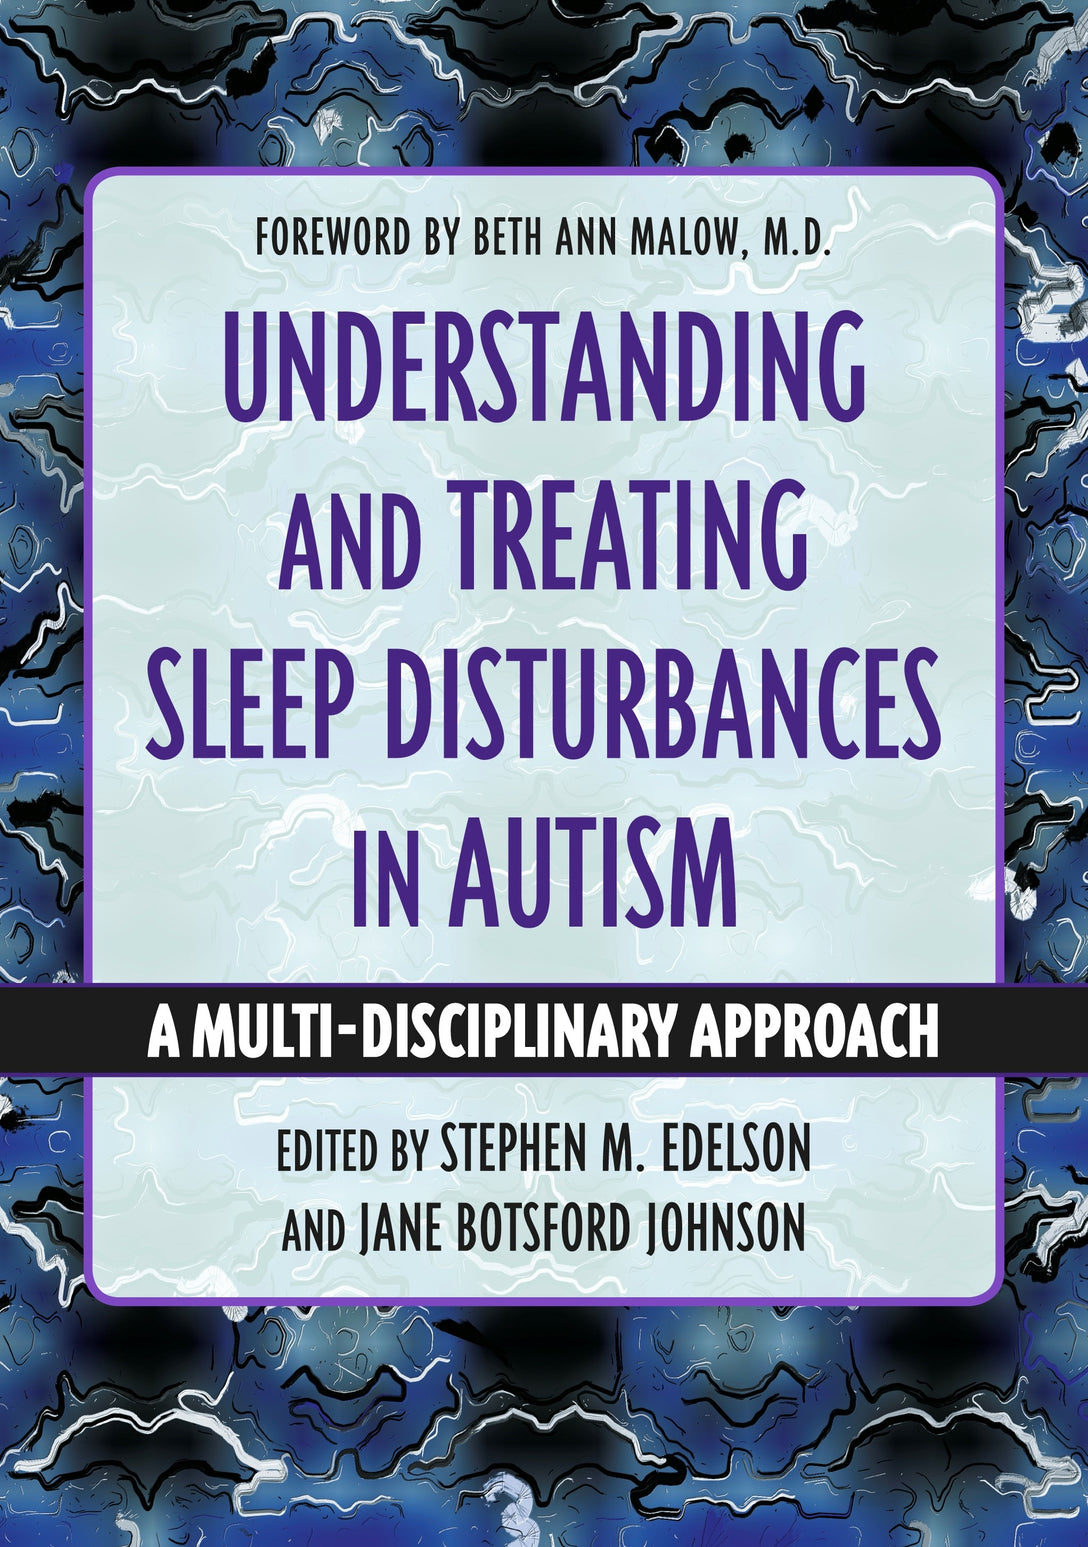 Understanding and Treating Sleep Disturbances in Autism by Stephen M. Edelson, Jane Botsford Johnson, No Author Listed